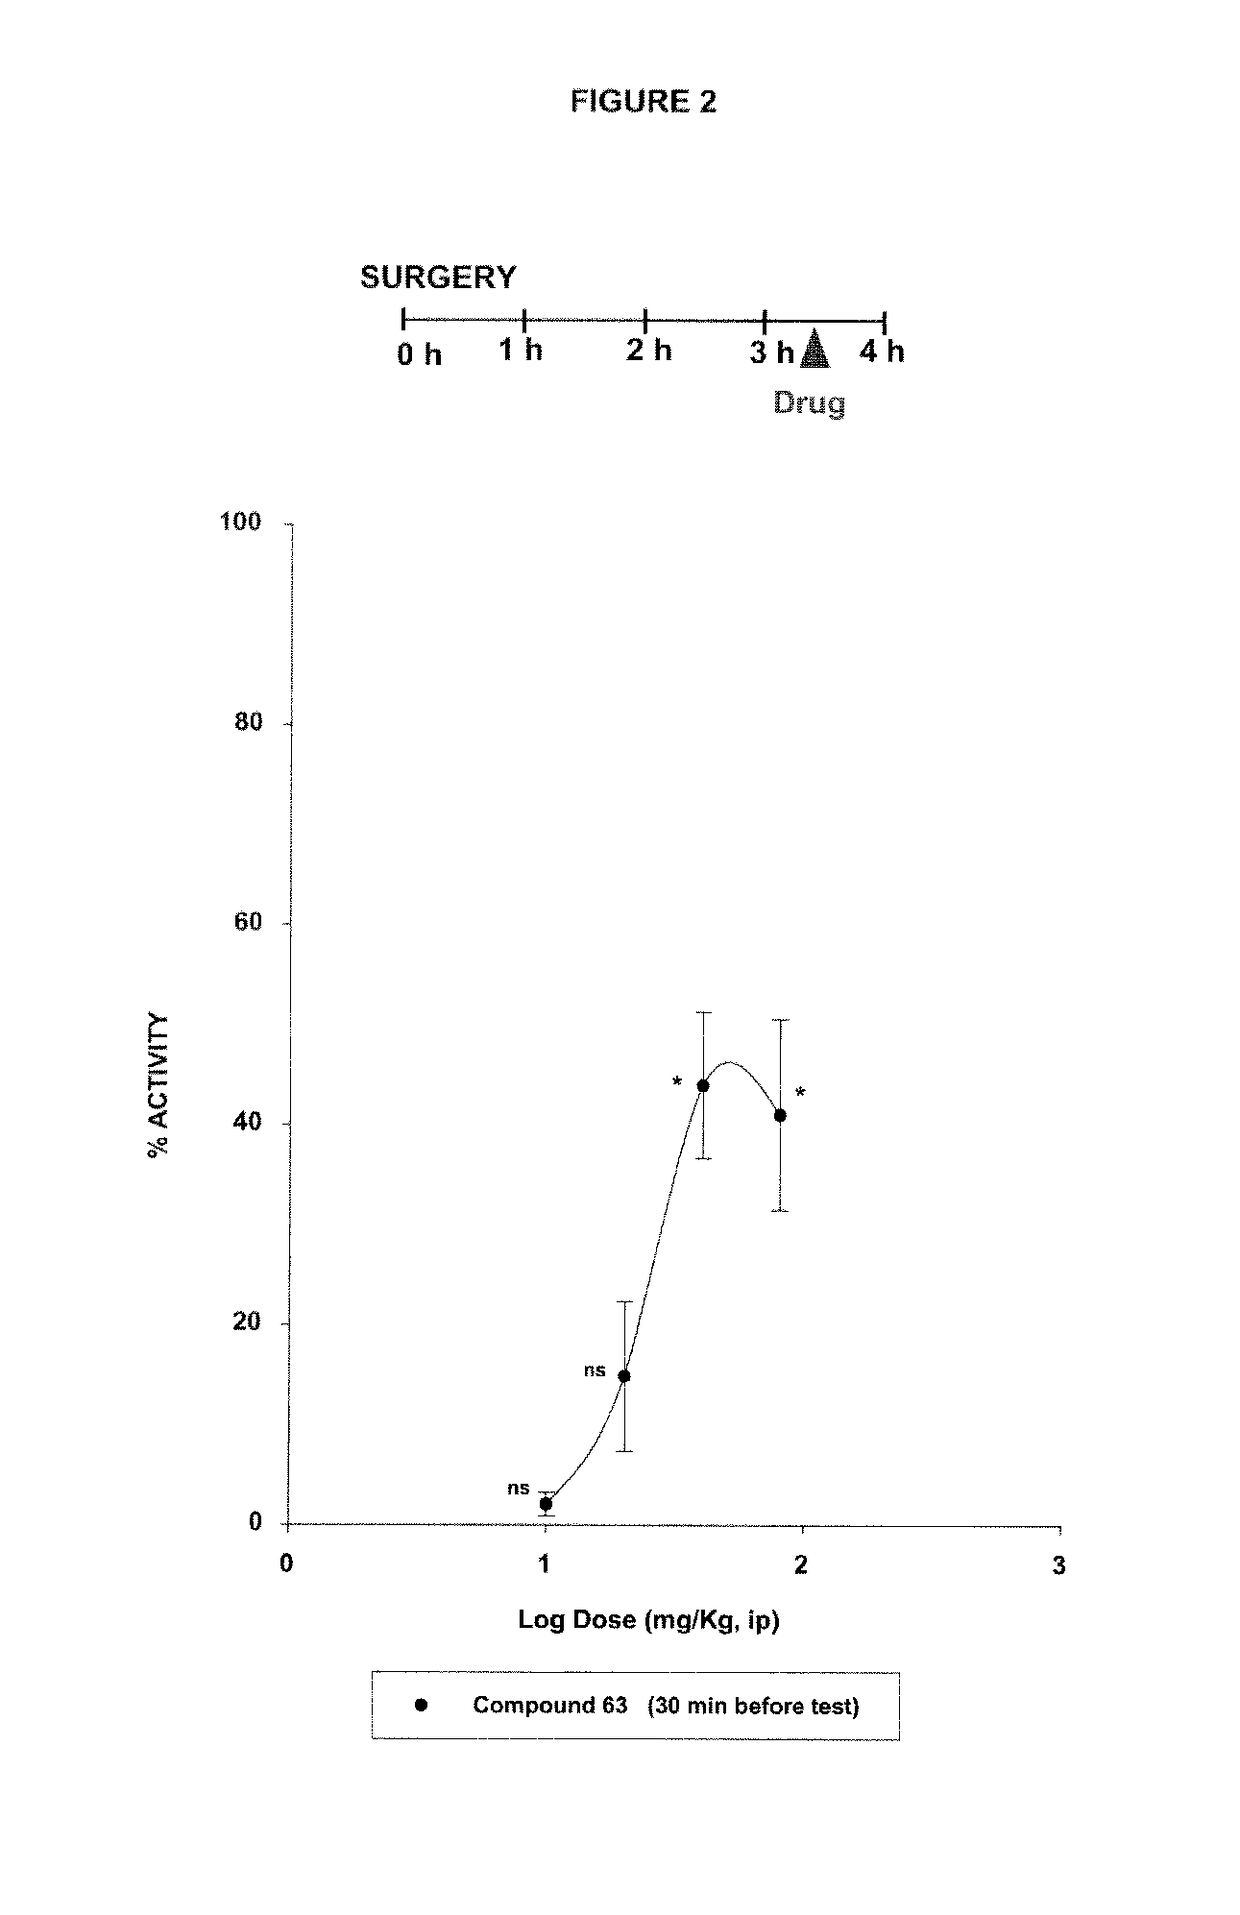 Sigma ligands for use in the prevention and/or treatment of post-operative pain